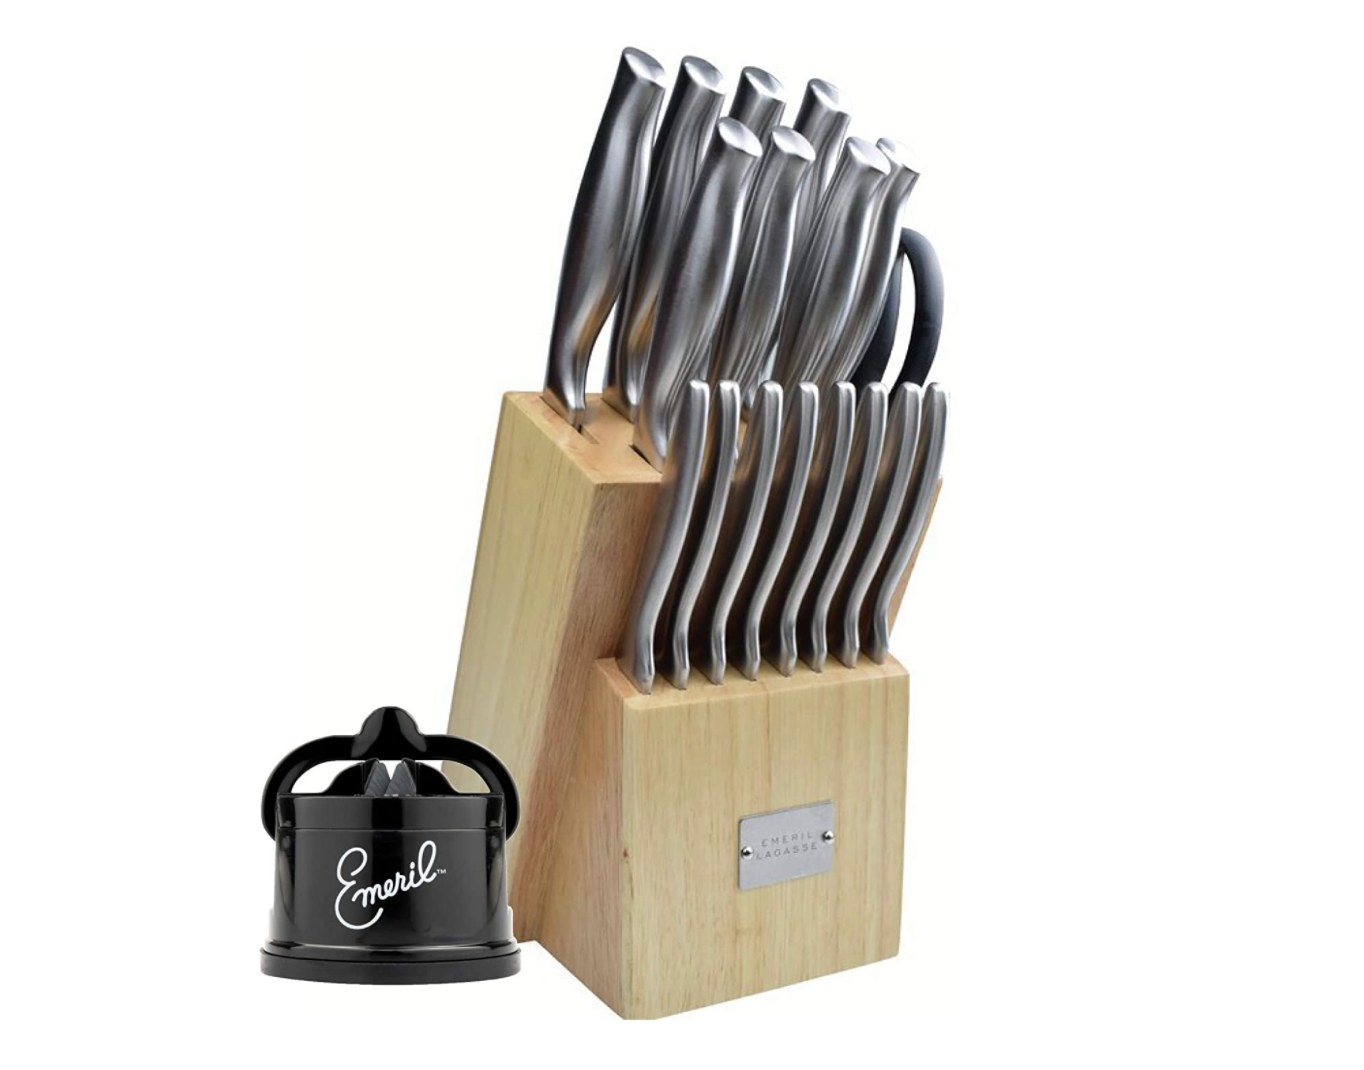 The 18 piece knife set in a wooden block